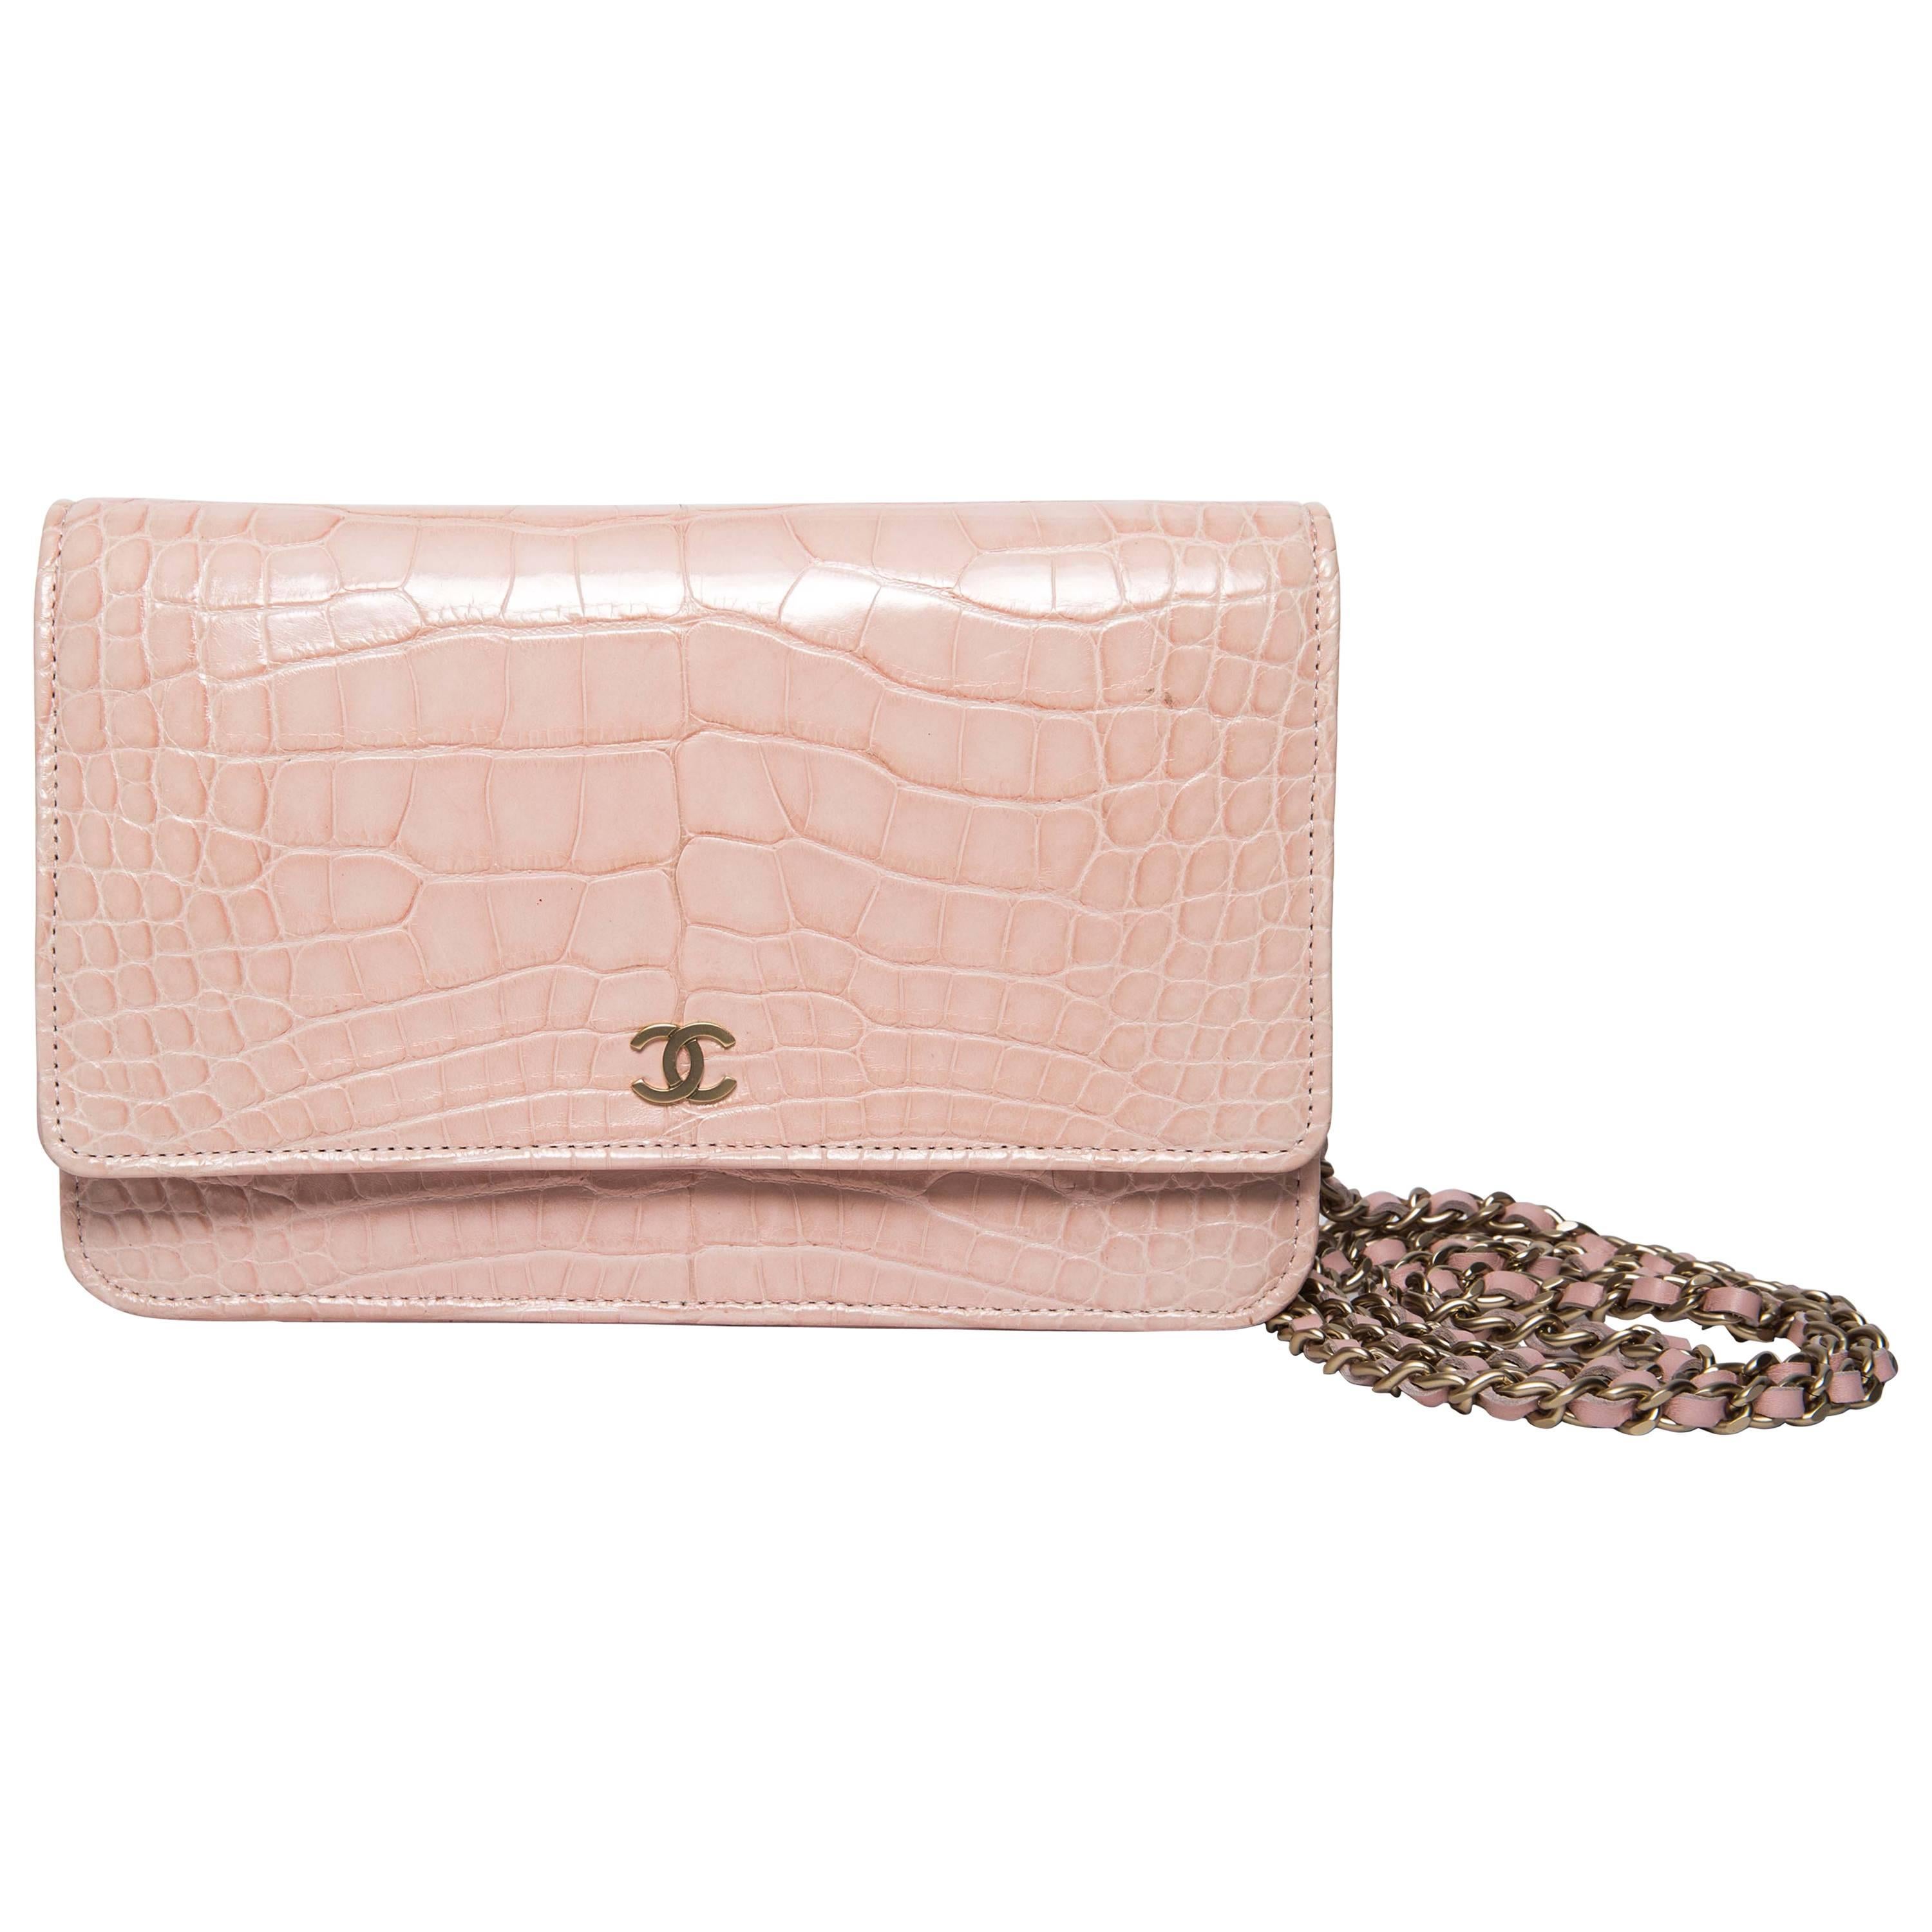 Chanel Wallet on a Chain in Blush Pink Alligator